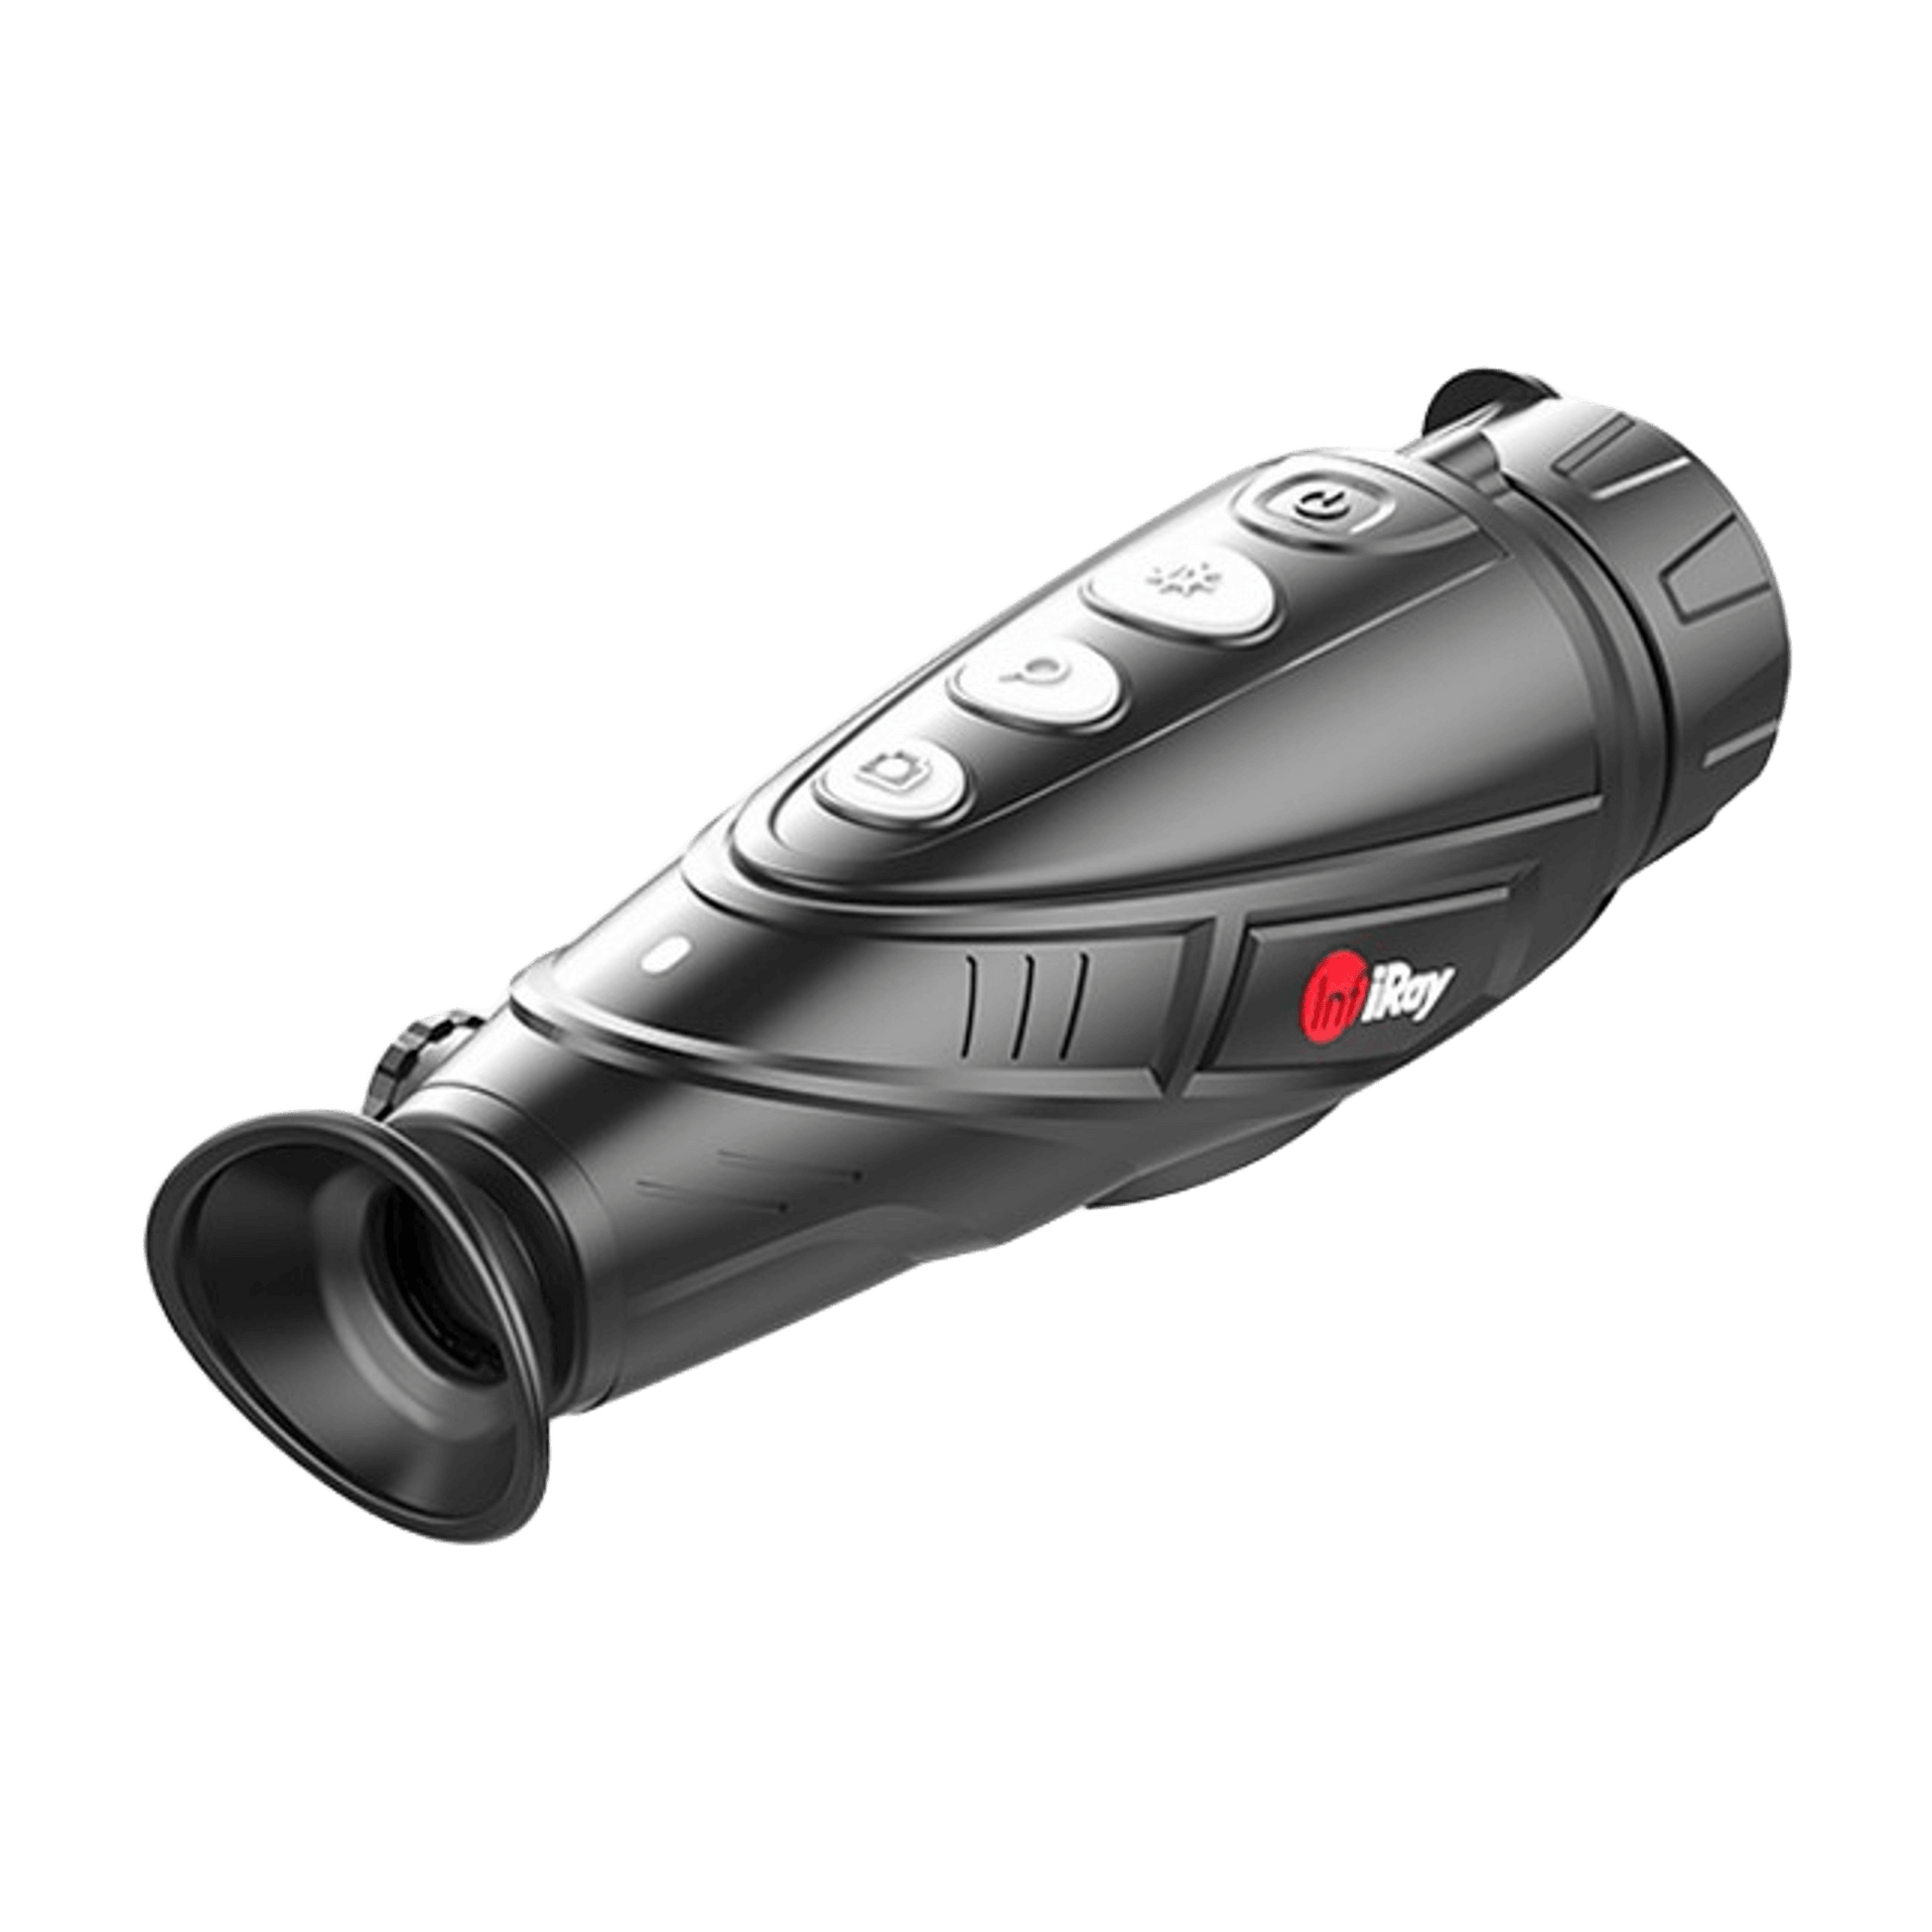 Rear Right View Infiray Eye E6 Pro Handheld thermal imaging monocular for sale Cape Thermal